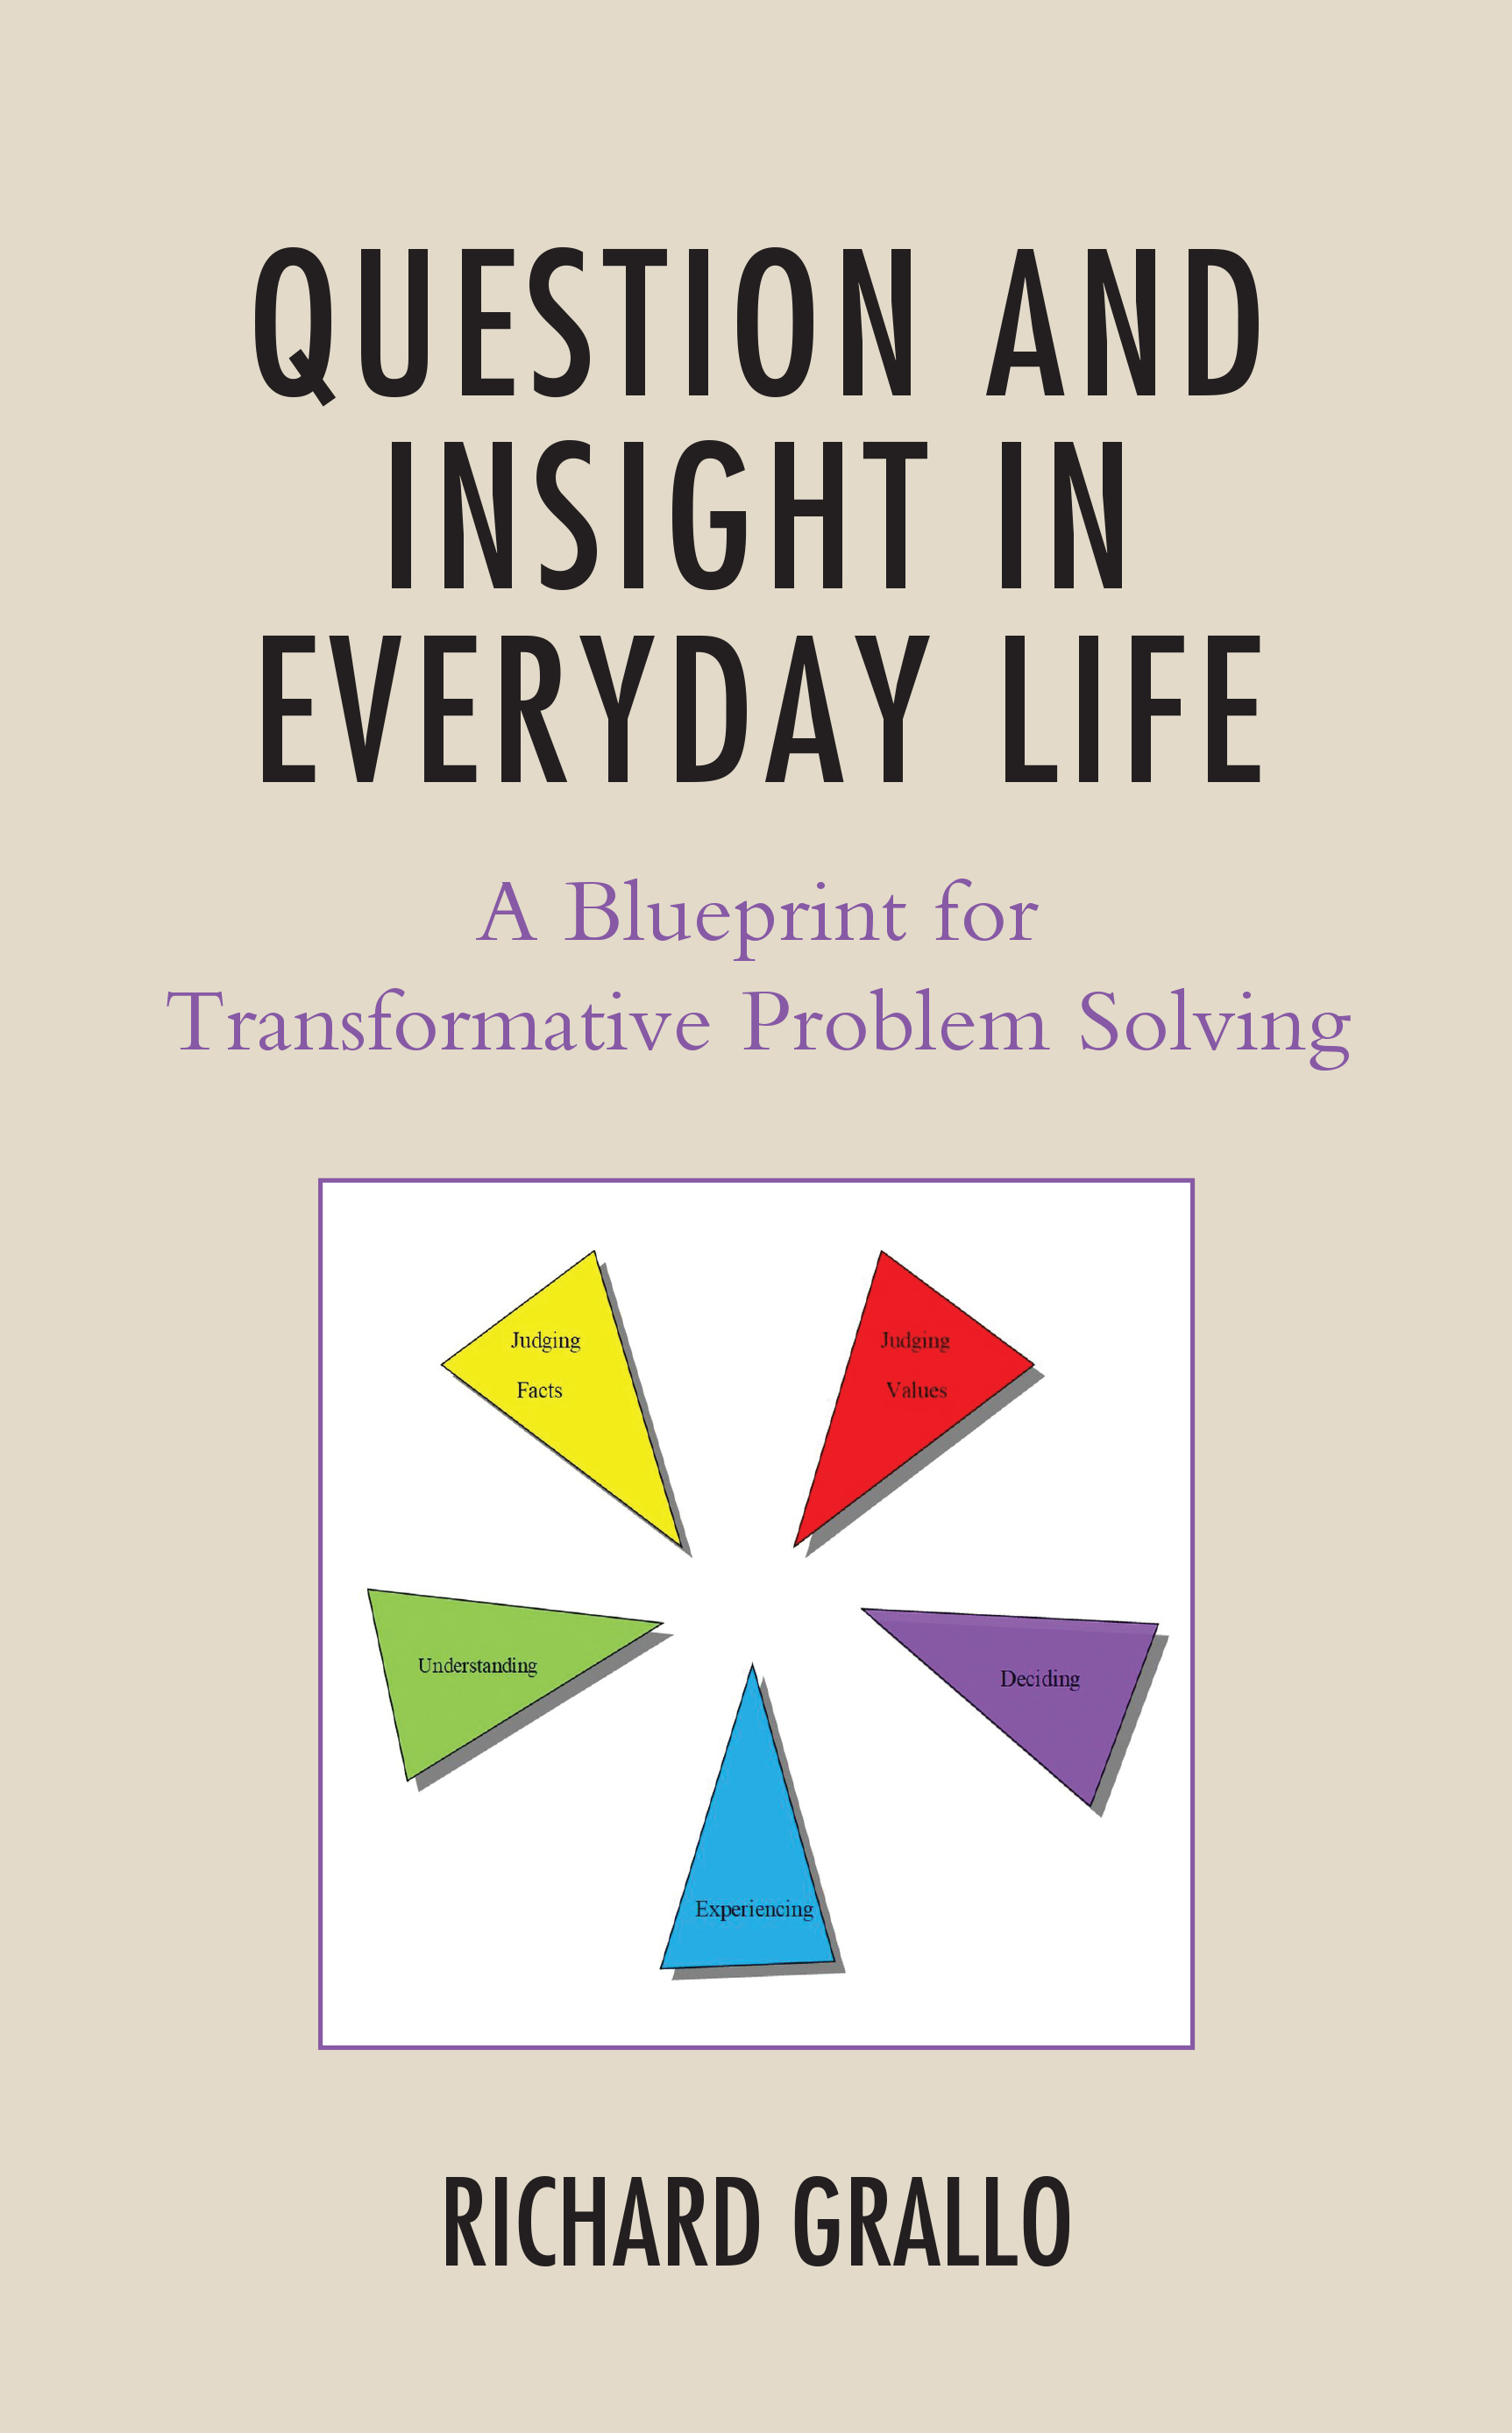 Question and Insight in Everyday Life: A Blueprint for Transformative Problem Solving